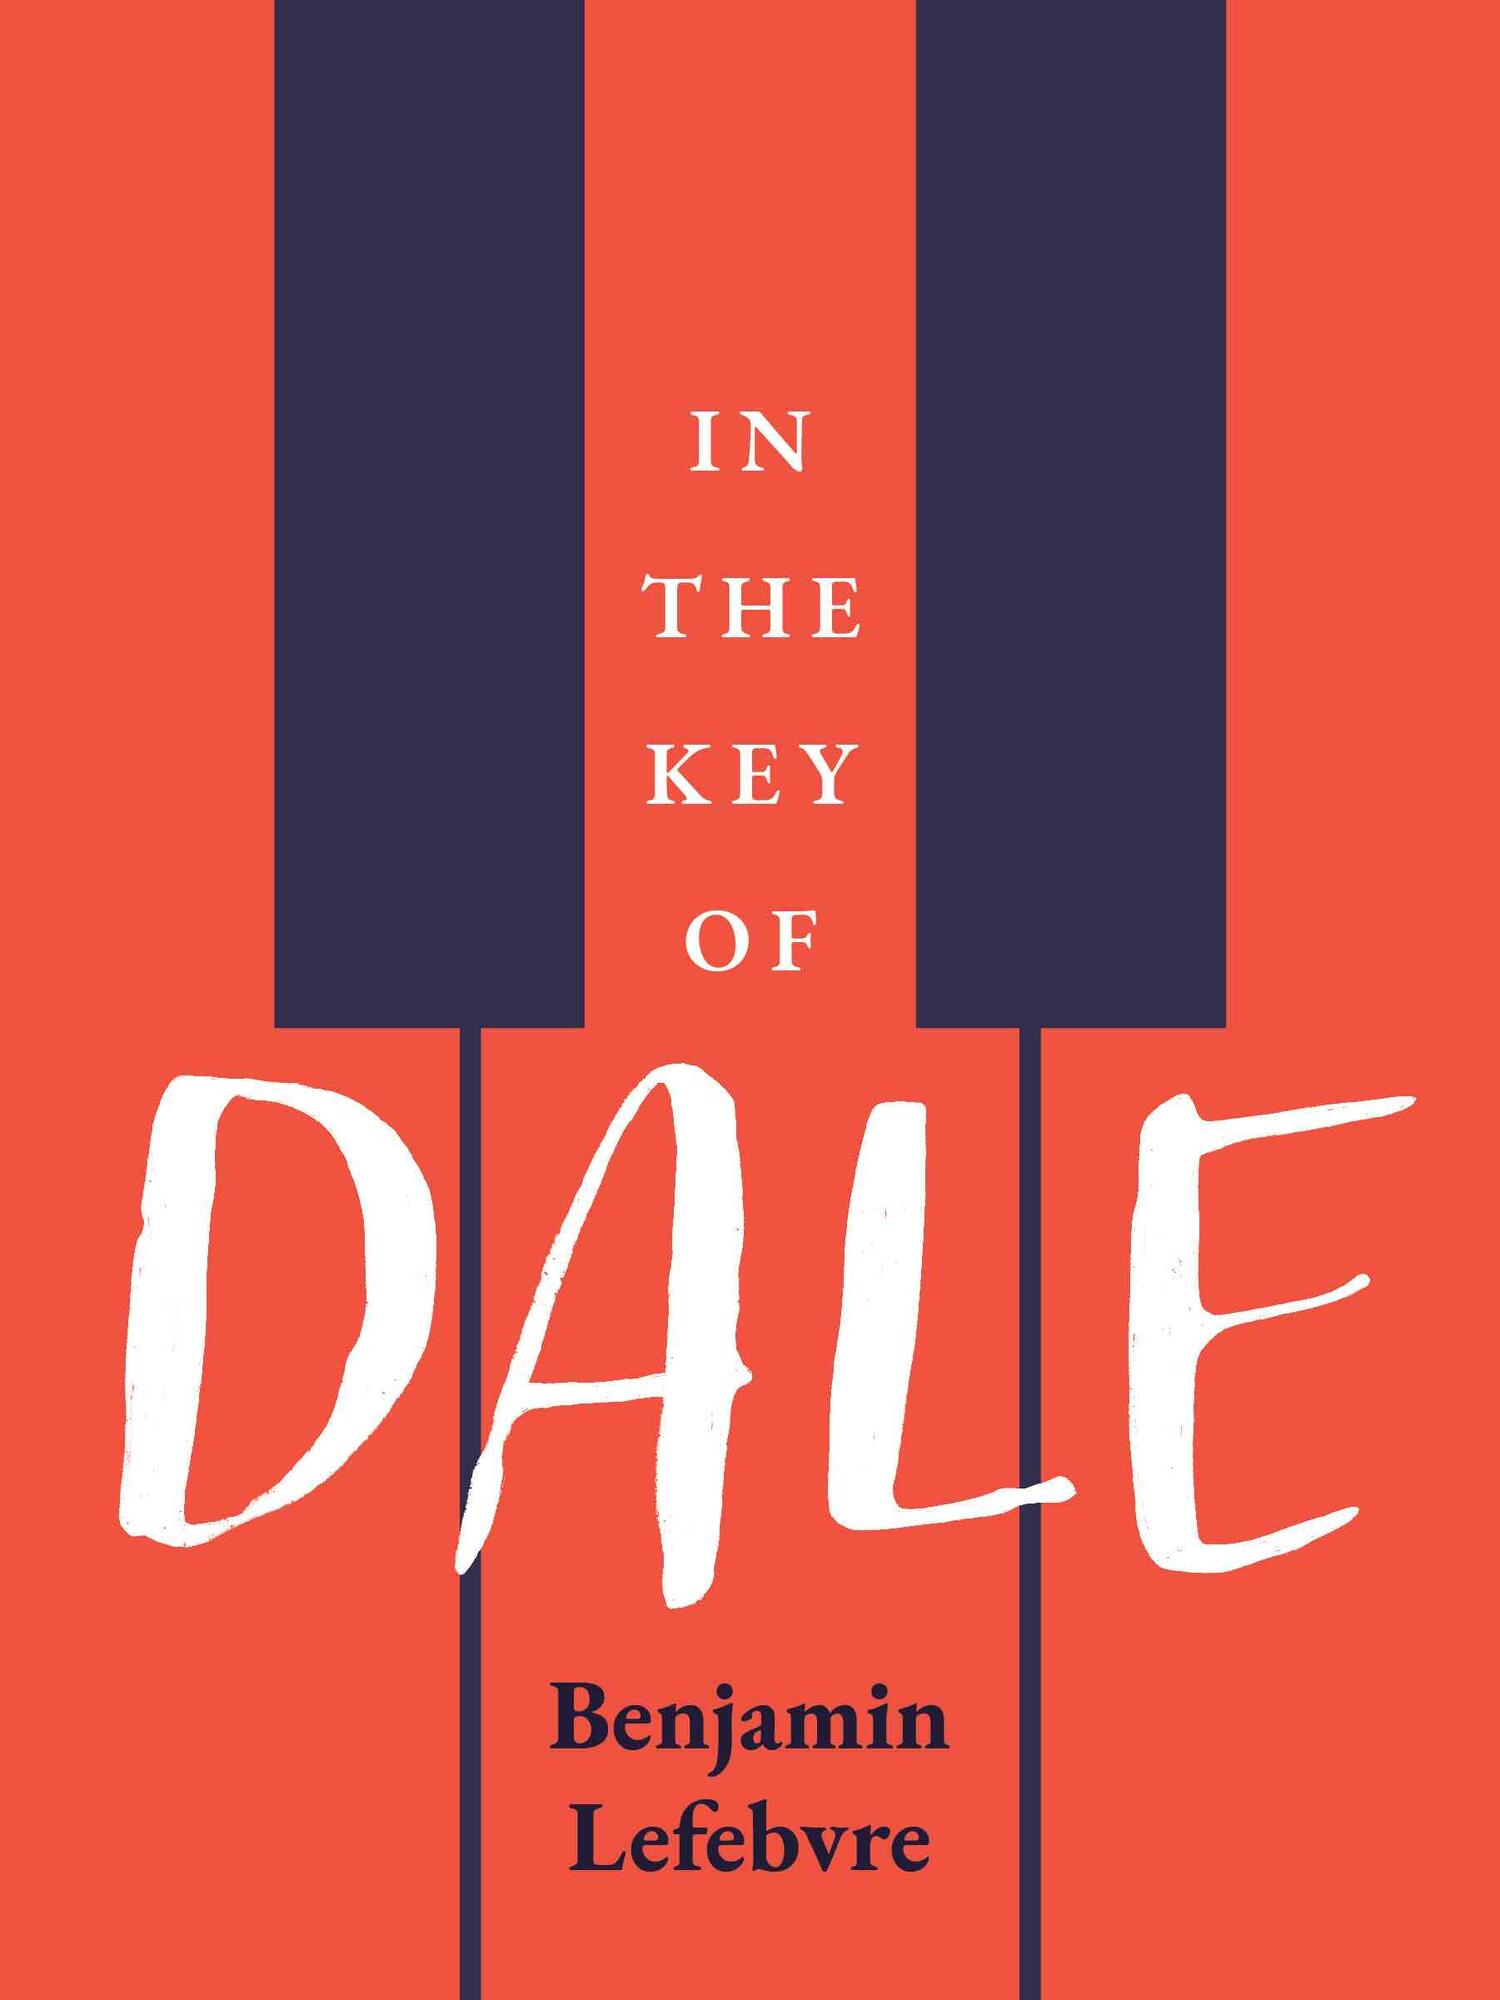 Cover of In the Key of Dale, by Benjamin Lefebvre, which consists of that text against orange and navy blue piano keys.